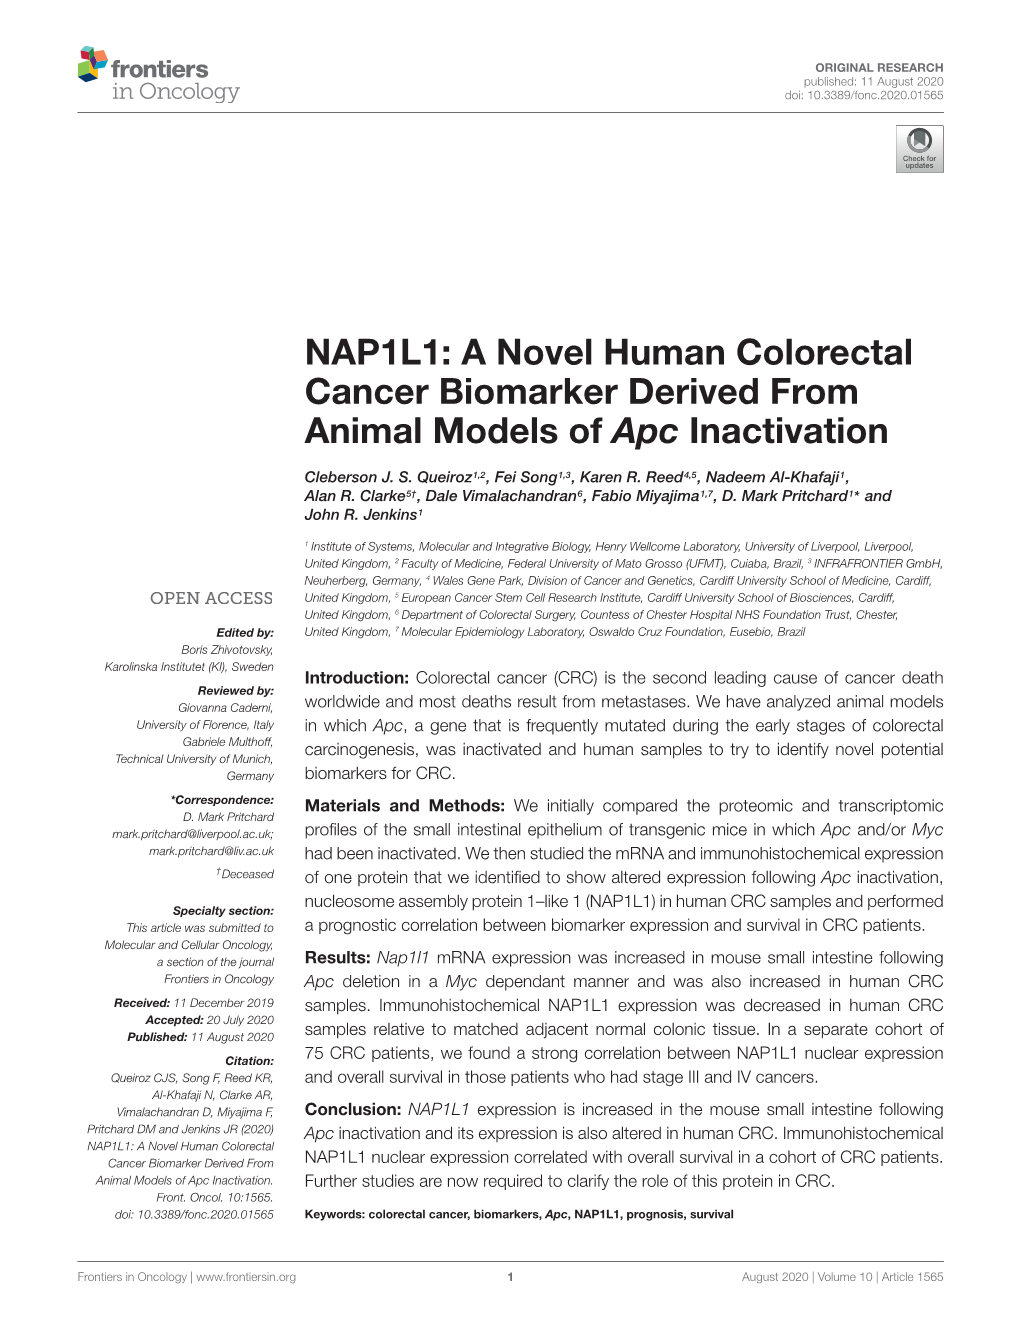 NAP1L1: a Novel Human Colorectal Cancer Biomarker Derived from Animal Models of Apc Inactivation